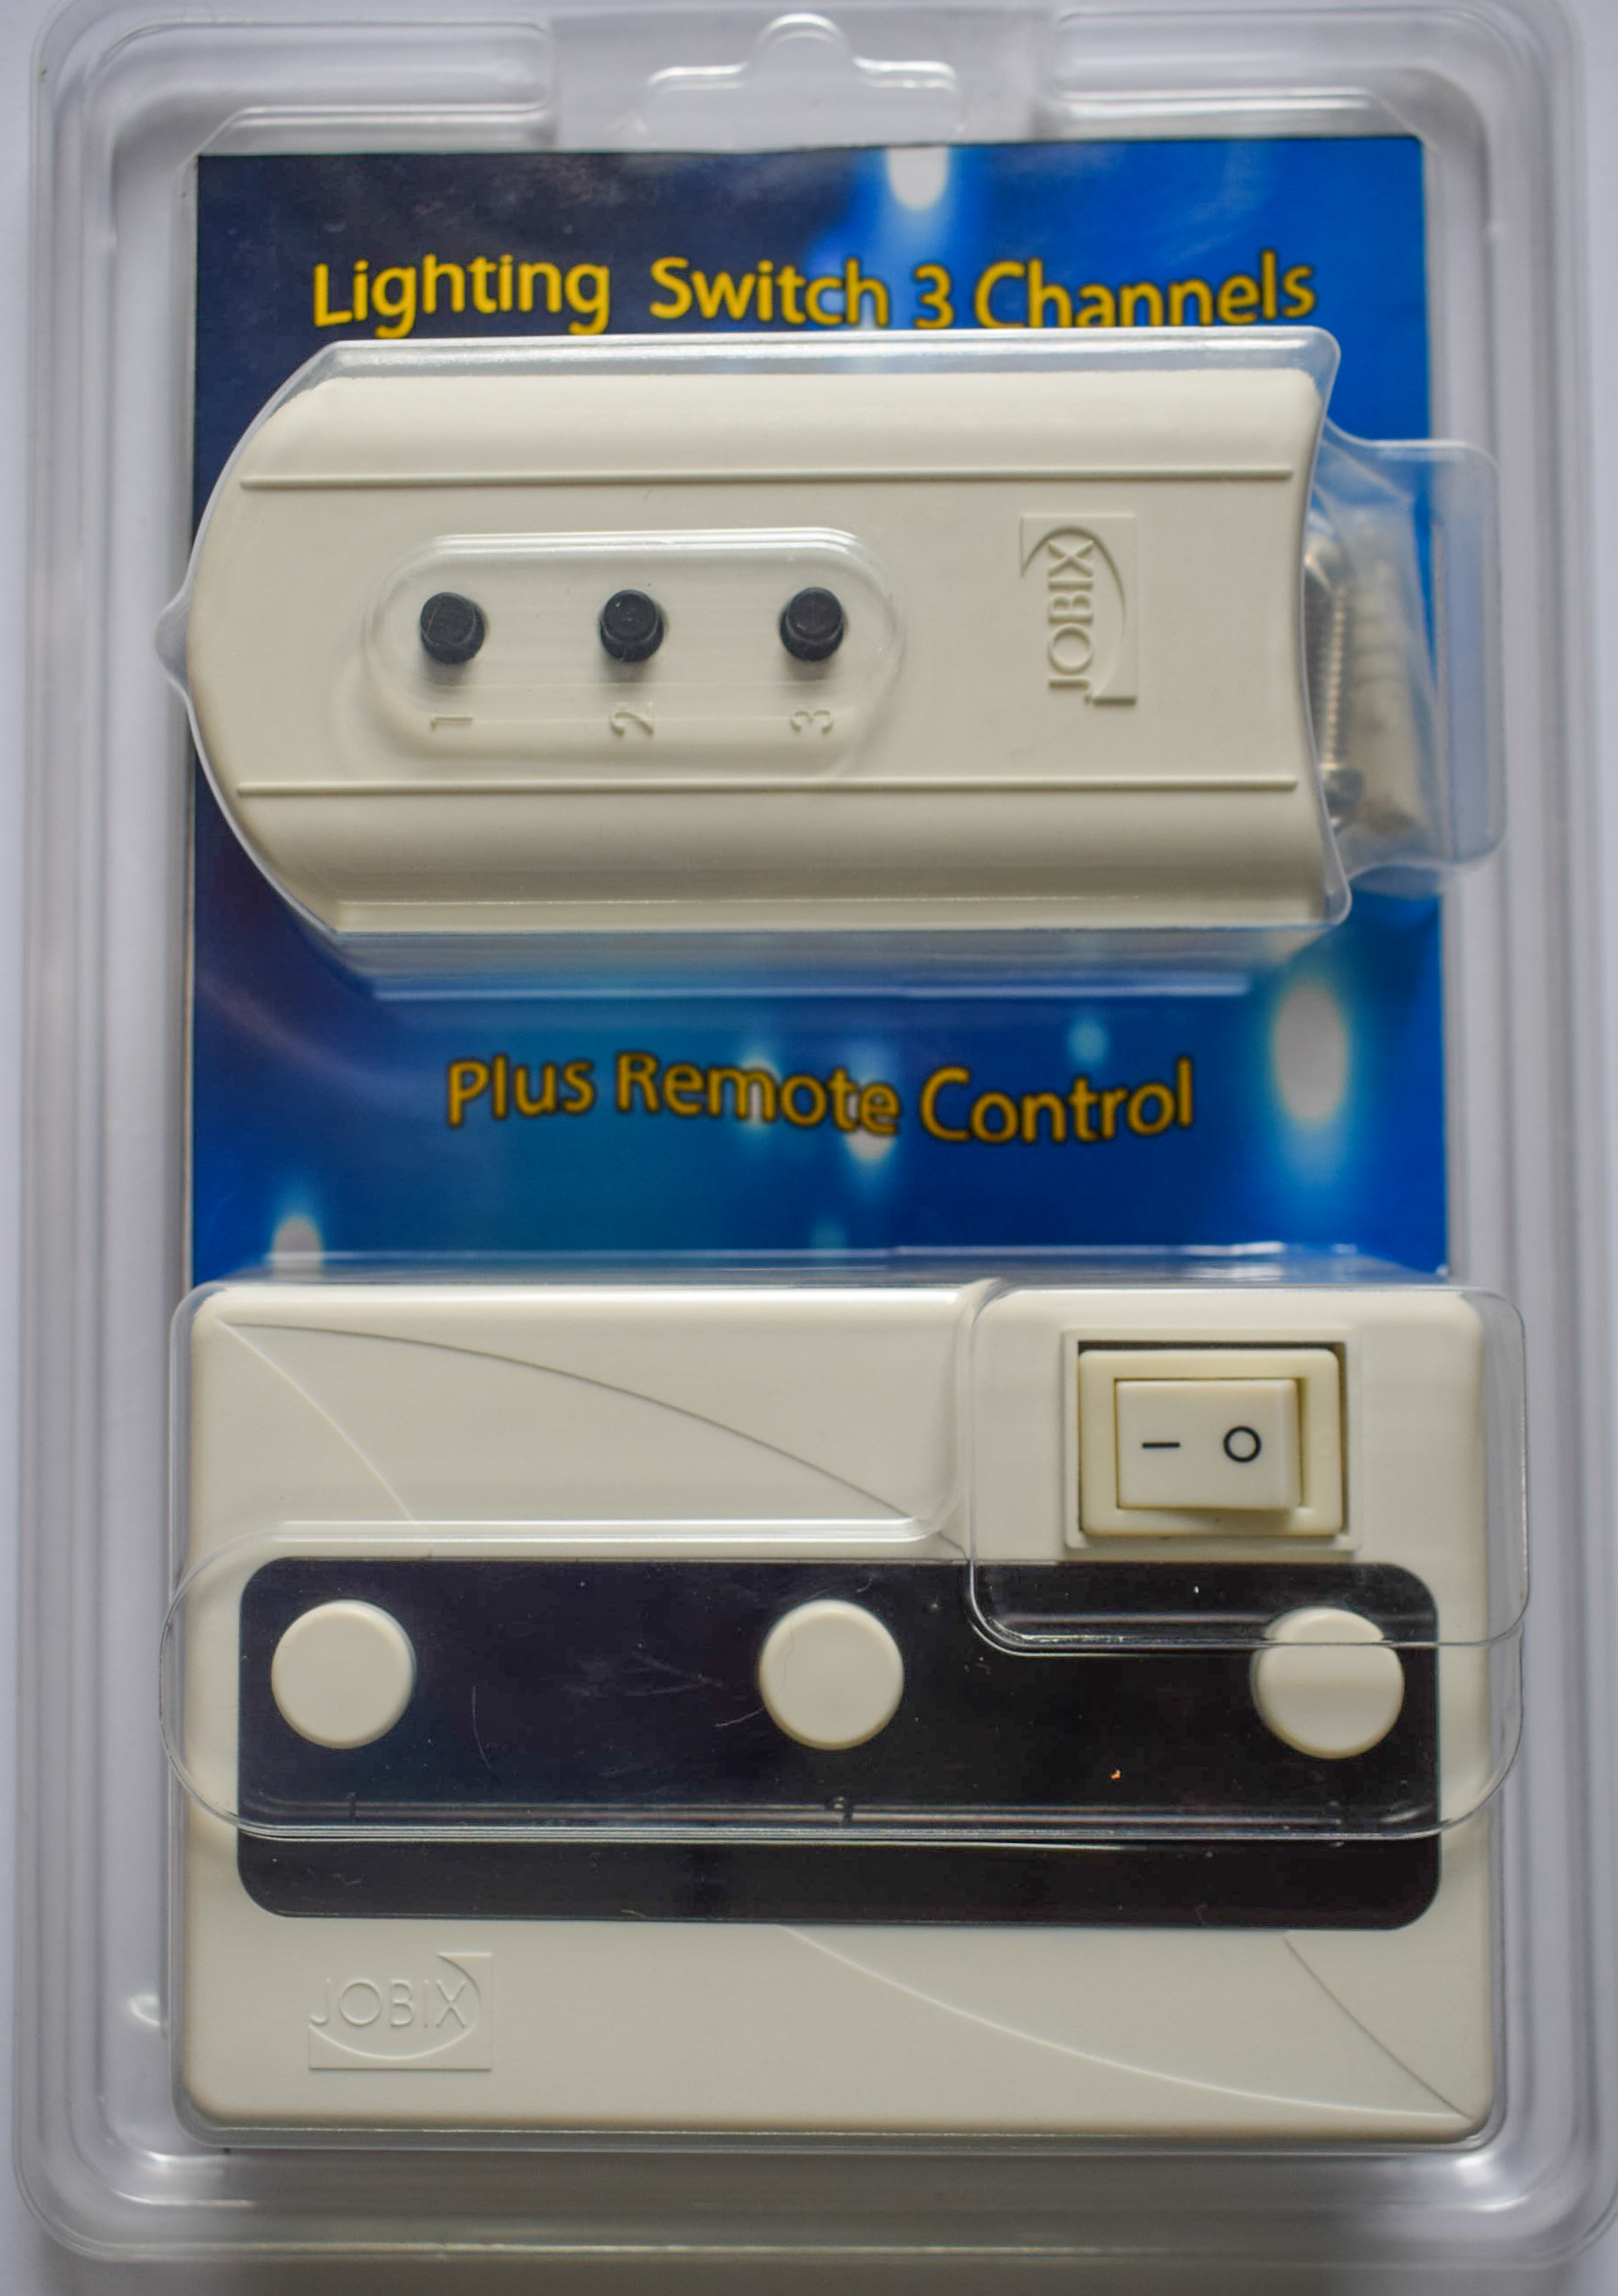 Lighting switch with remote control